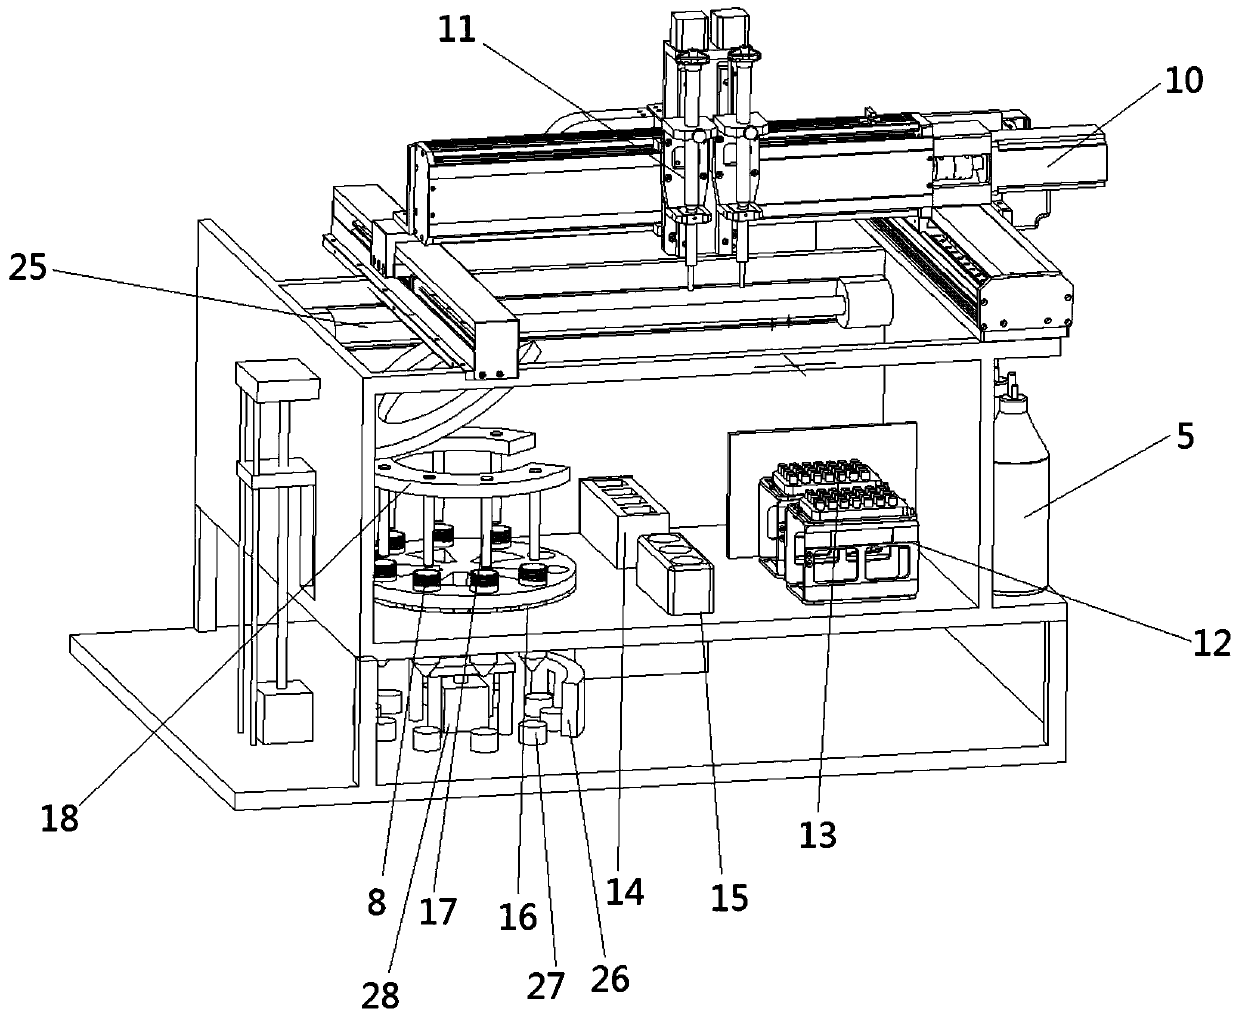 Pipetting and analysis device